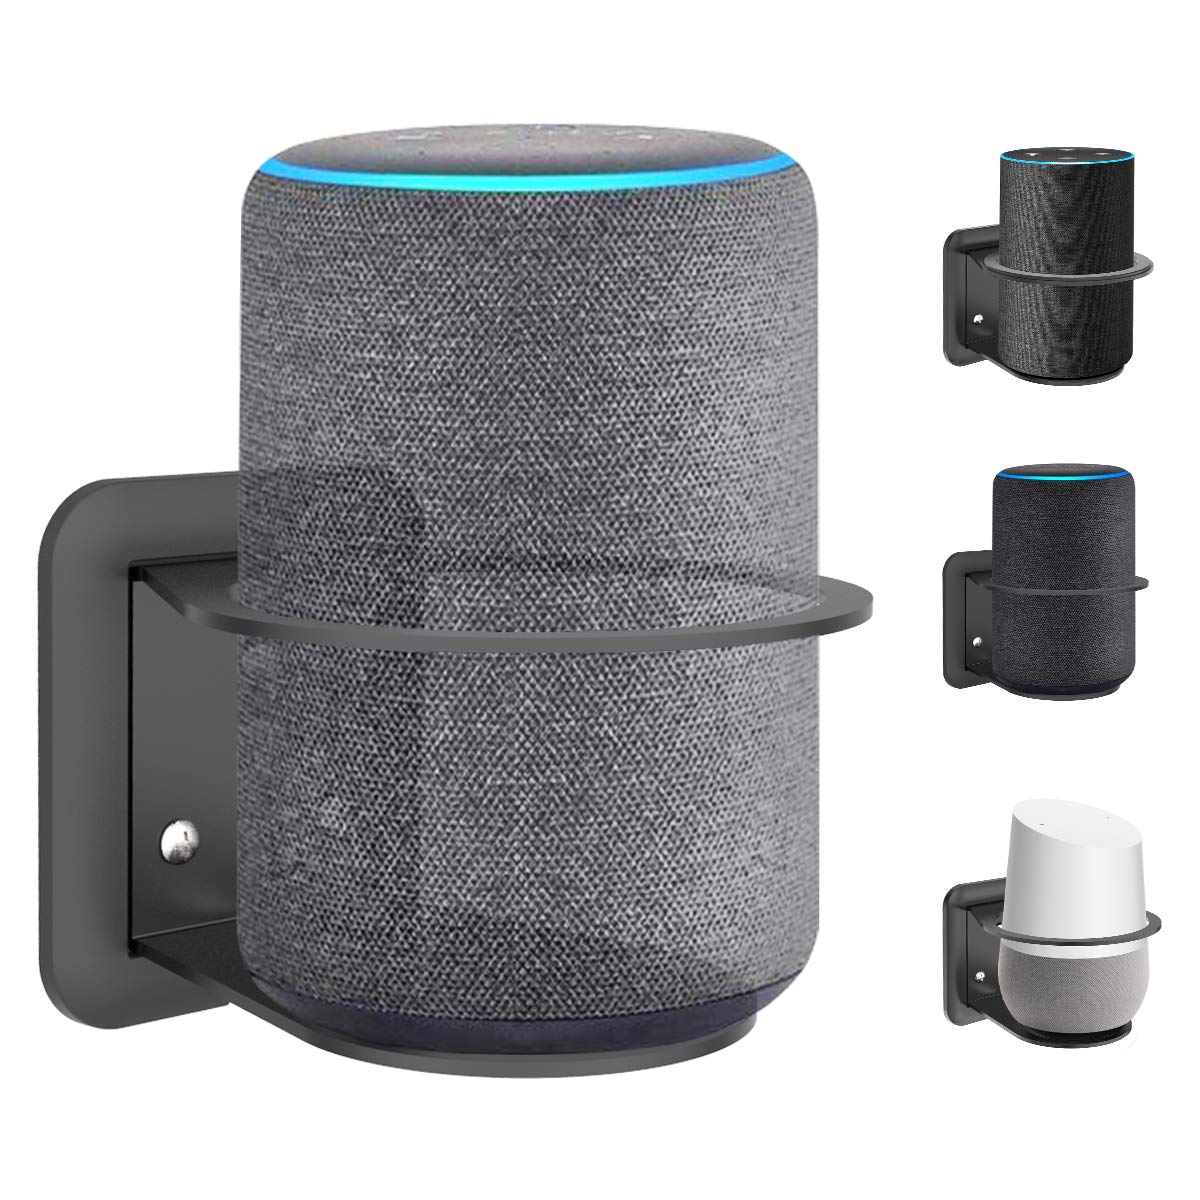 Book Cover Wall Mount Holder Stand for Echo (3rd Gen), Echo Plus (2nd Gen), Echo 2nd Generation, and Google Home– A Space-Saving Solution for Echo Plus, Echo 2nd/3nd Generation and Google Home -Black